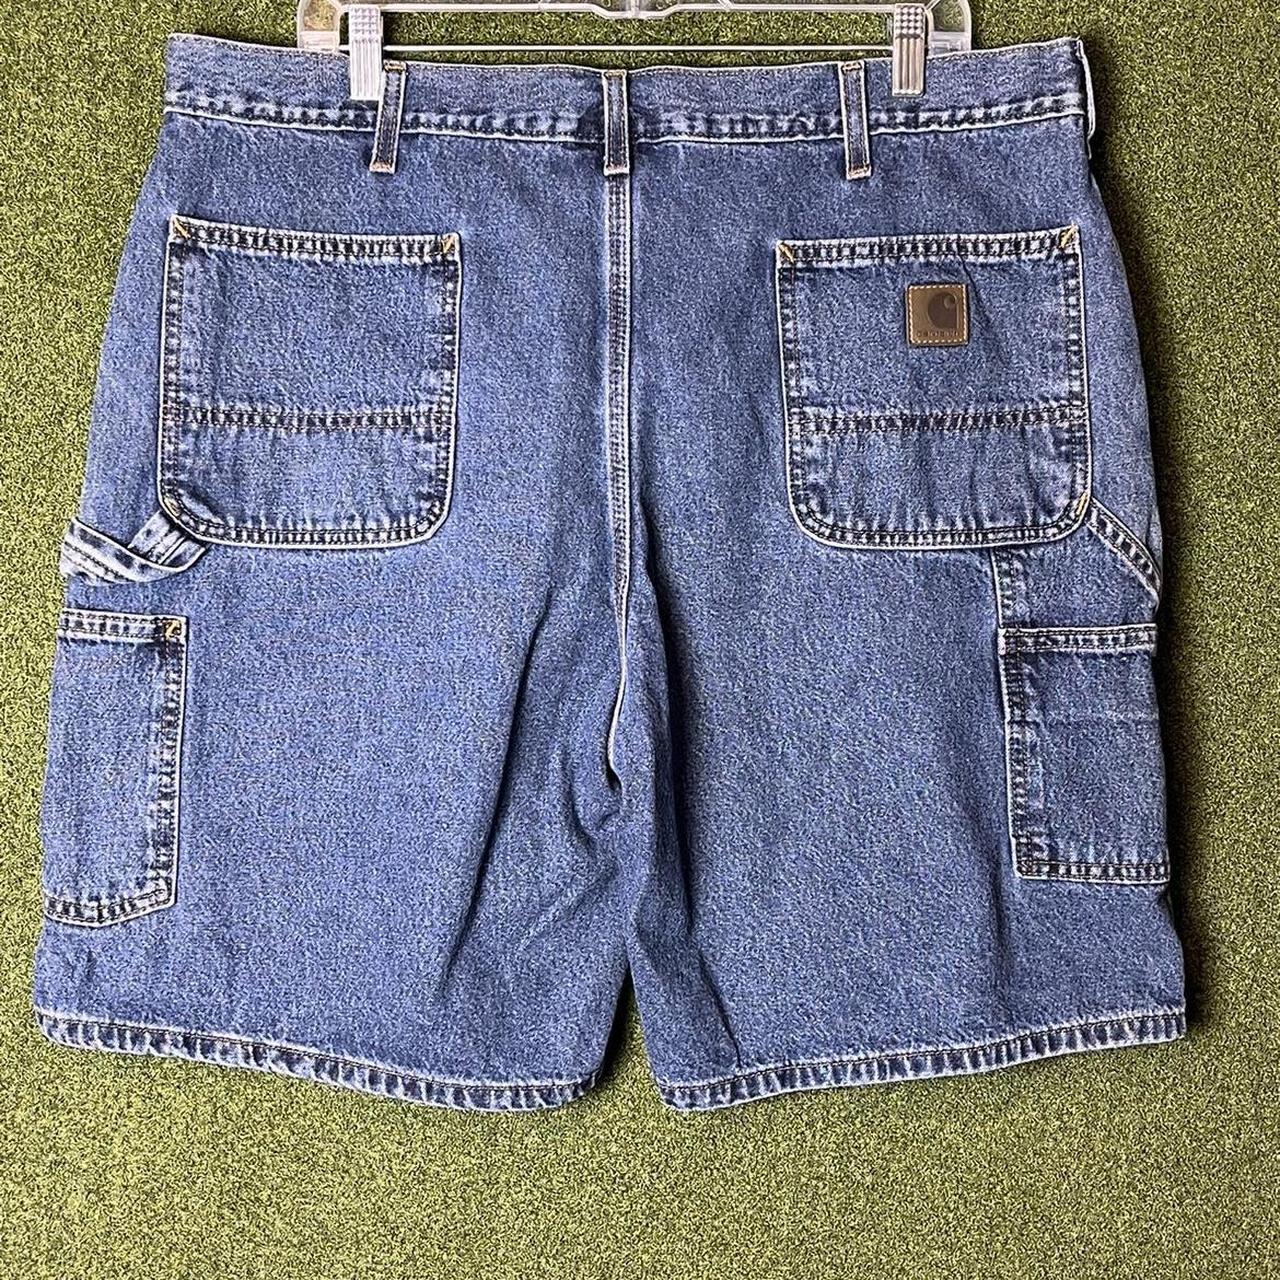 Vintage Carhart Jorts size 40 great fit they feel... - Depop